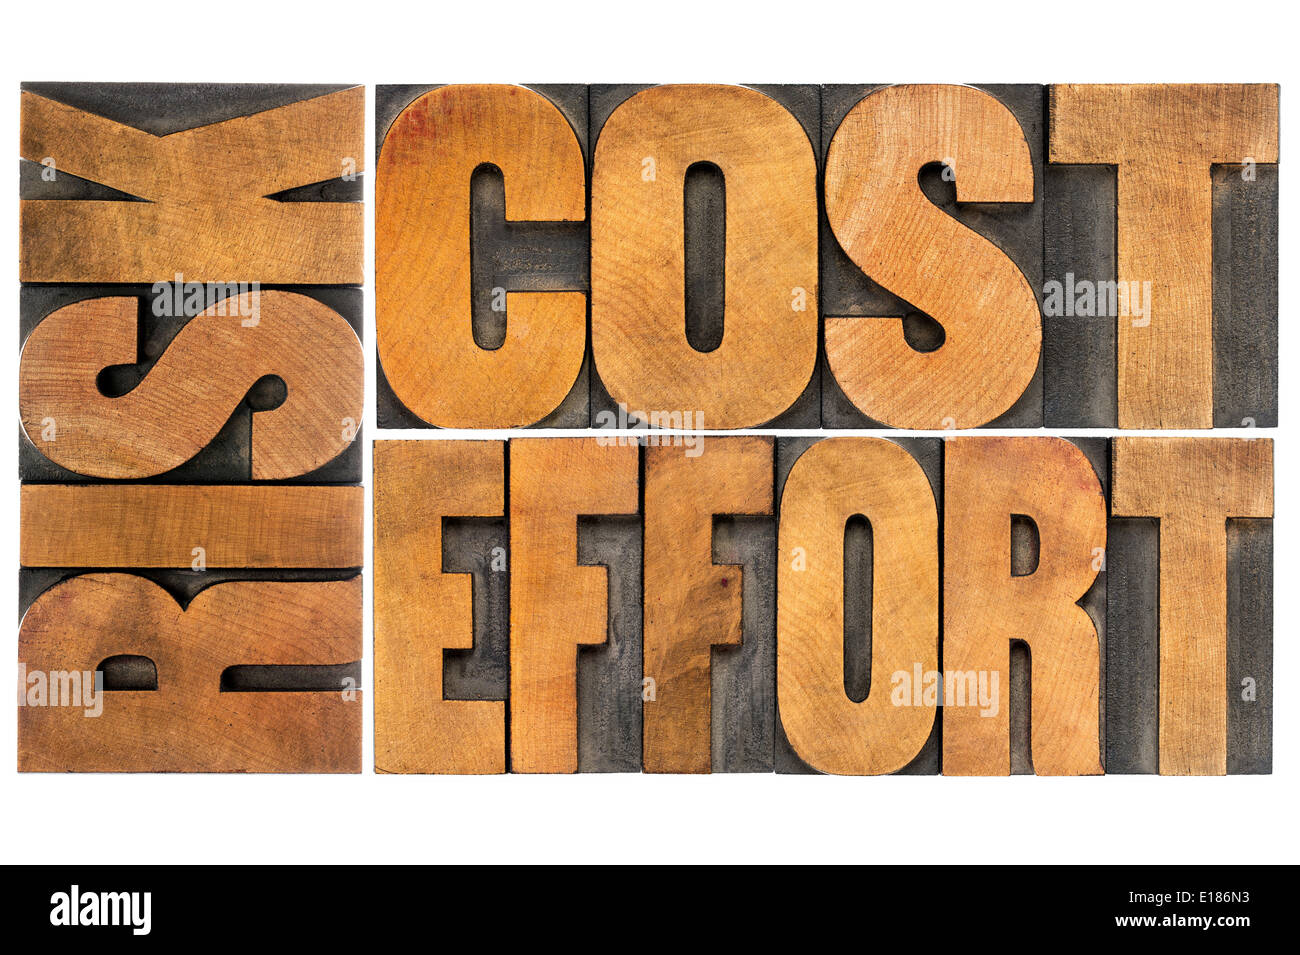 cost, effort, risk - business concept - a collage of isolated words in vintage wood letterpress printing blocks Stock Photo